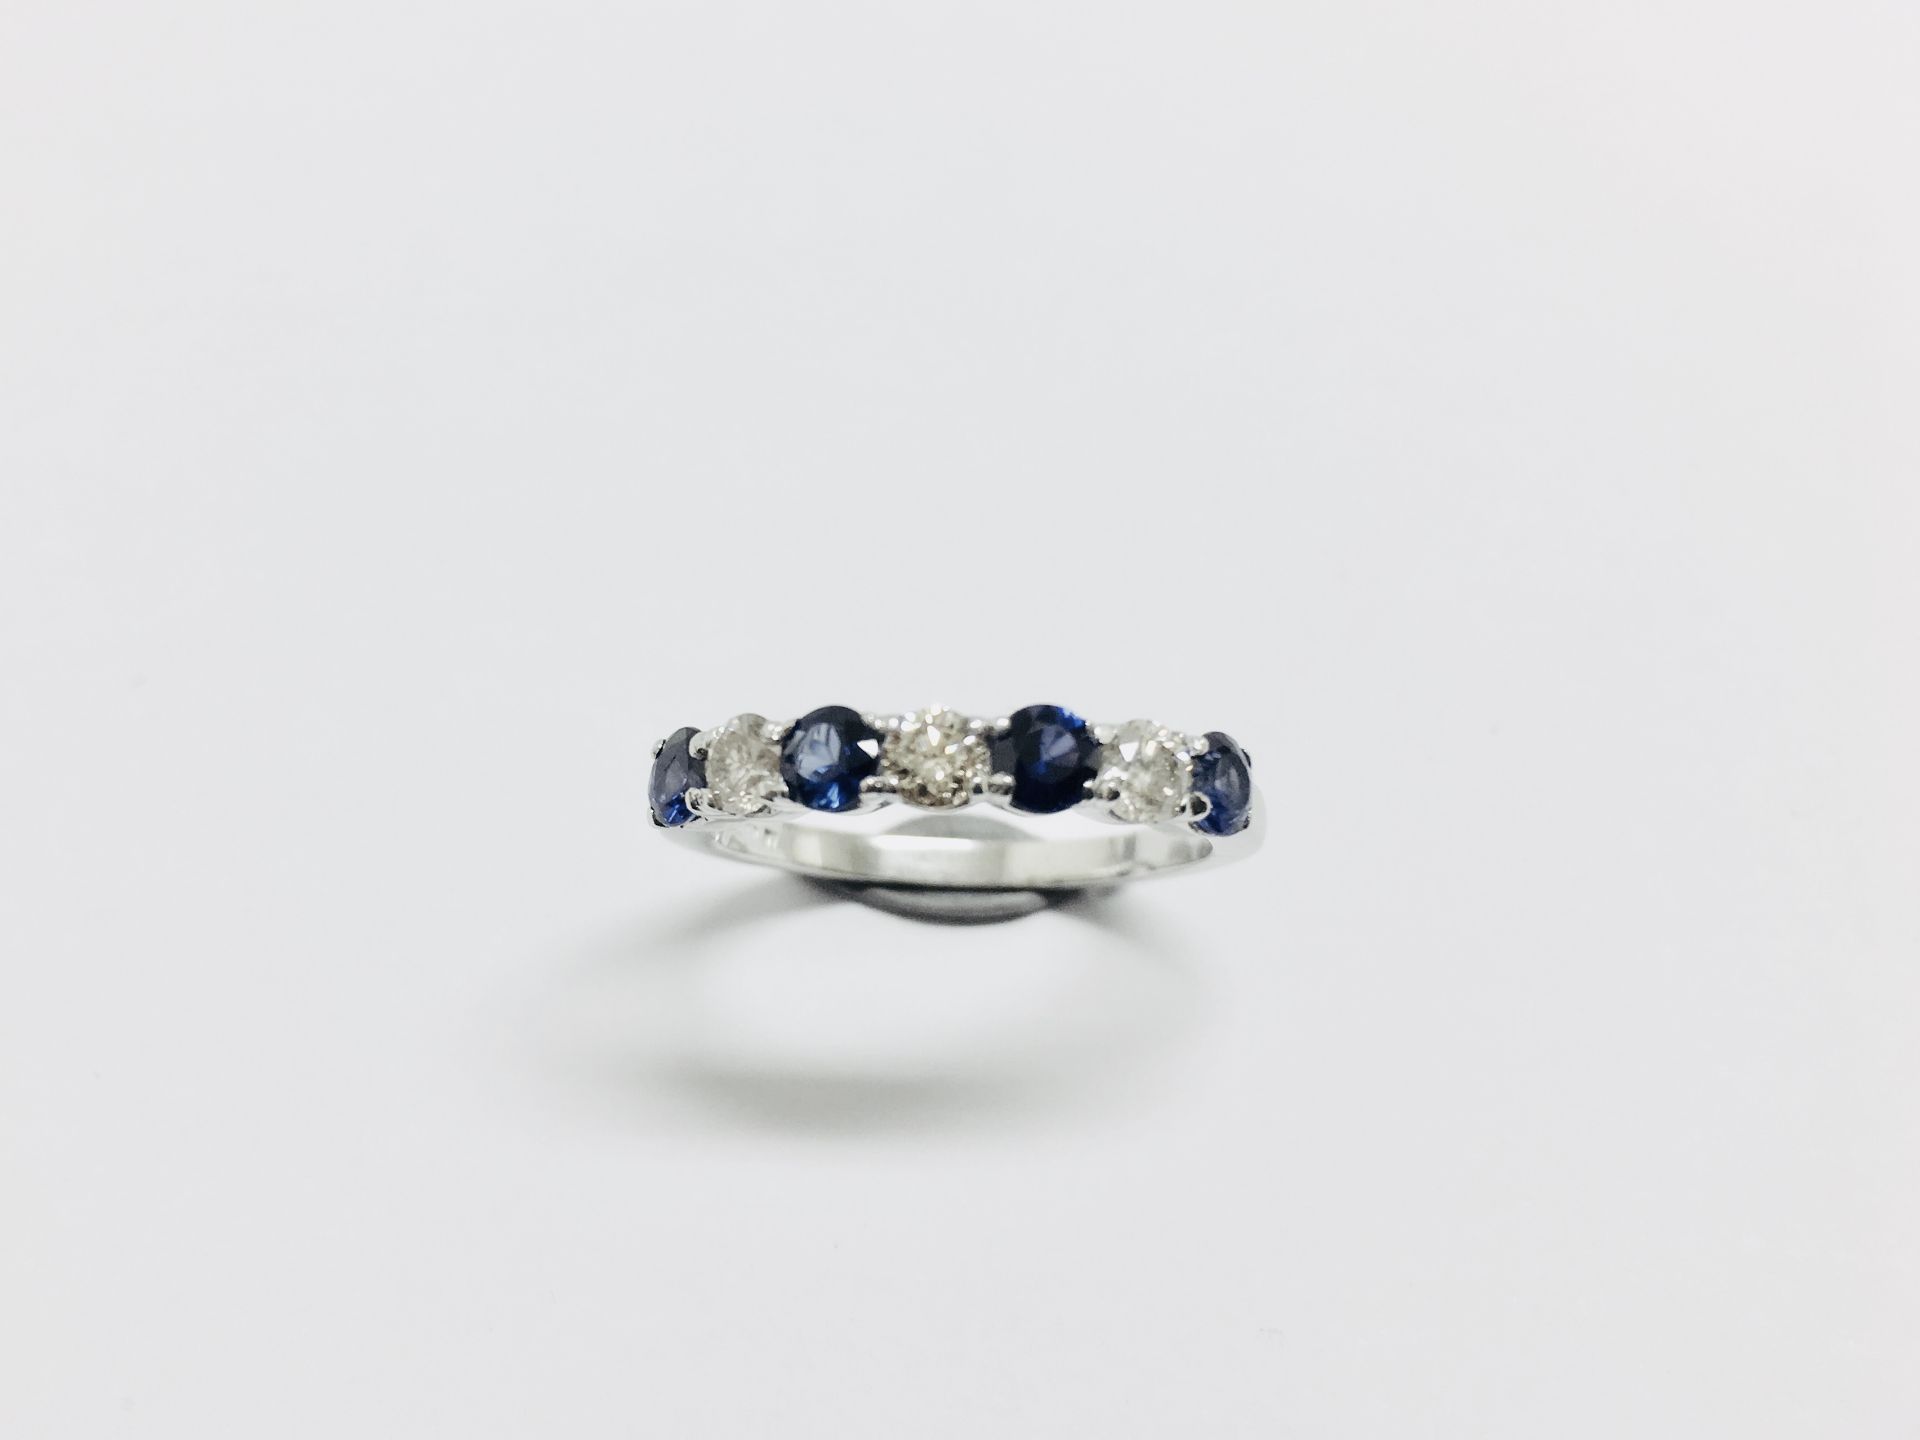 Sapphire and diamond eternity style ring. 4 round cut sapphires ( treated) 3 brilliant cut diamonds. - Image 2 of 4